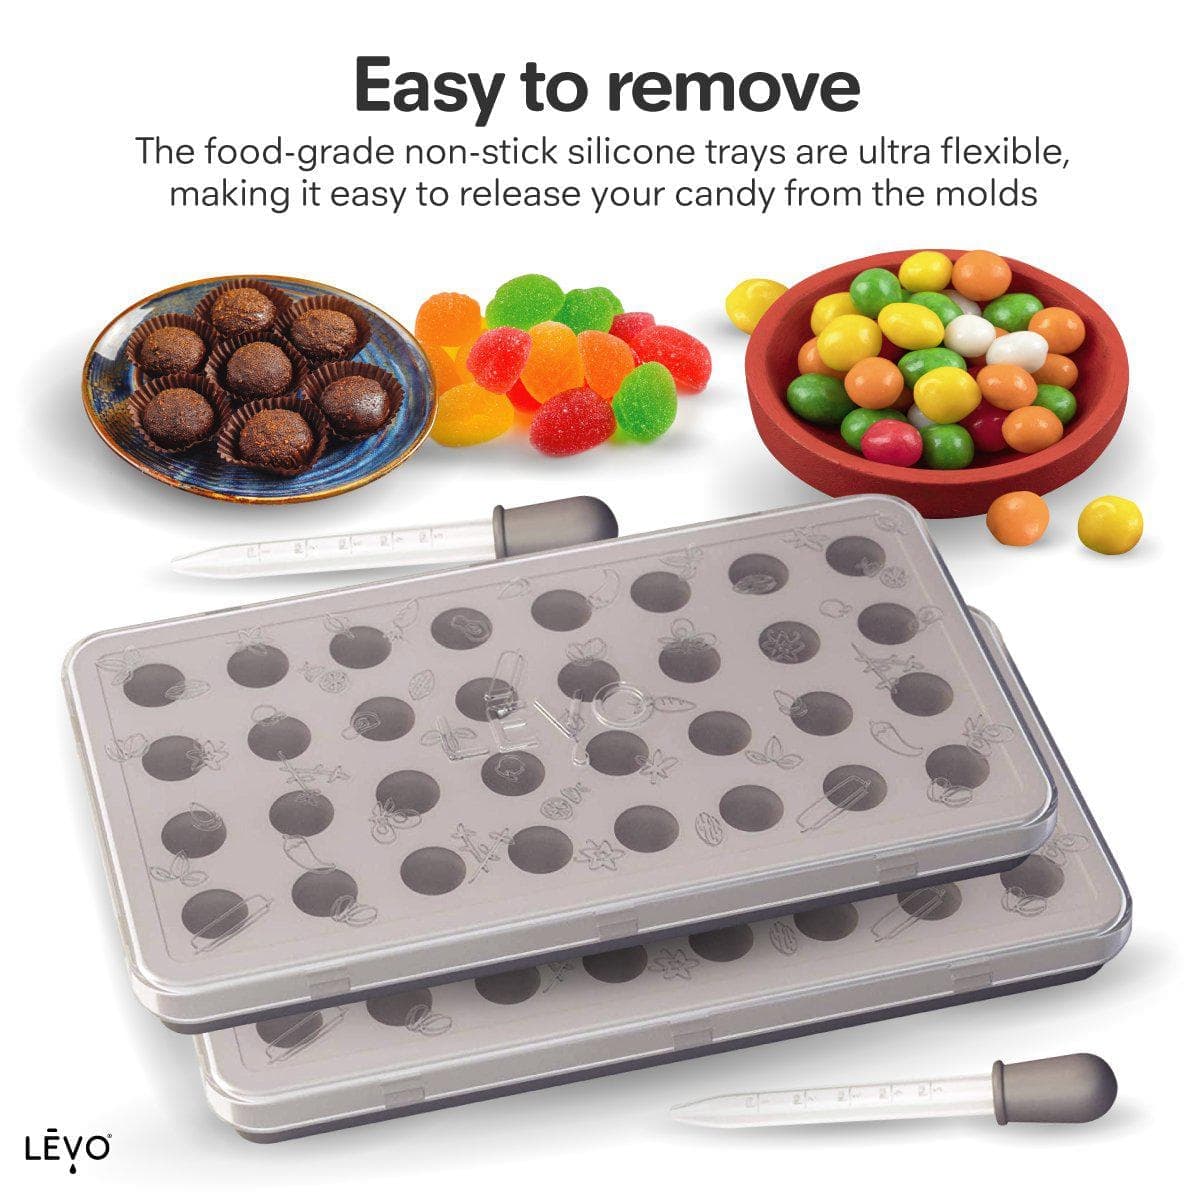 Easy to remove your gummies and candies in the food-grade non-stick silicone tray. Ultra flexible, making it easy to release your candy from the molds. Versatile Candy Making - Make gummies, chocolates, hard candy, and more with these versatile silicone molds. Easy Release Design - The non-stick silicone tray ensures easy removal of your gummies and candies without any hassle.